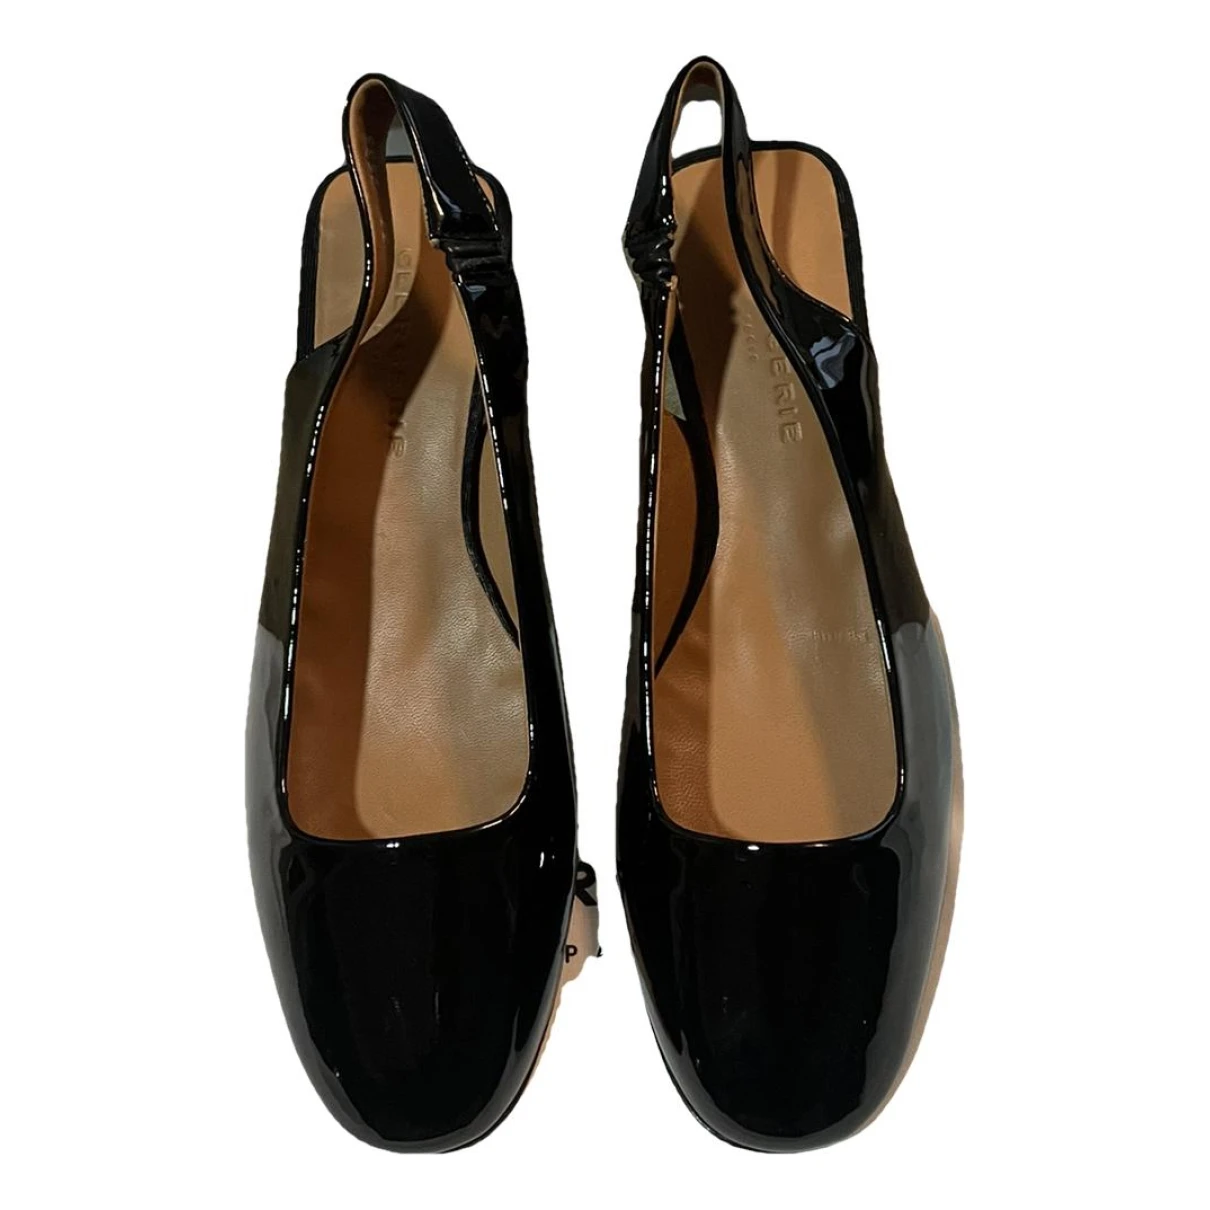 Pre-owned Robert Clergerie Patent Leather Heels In Black